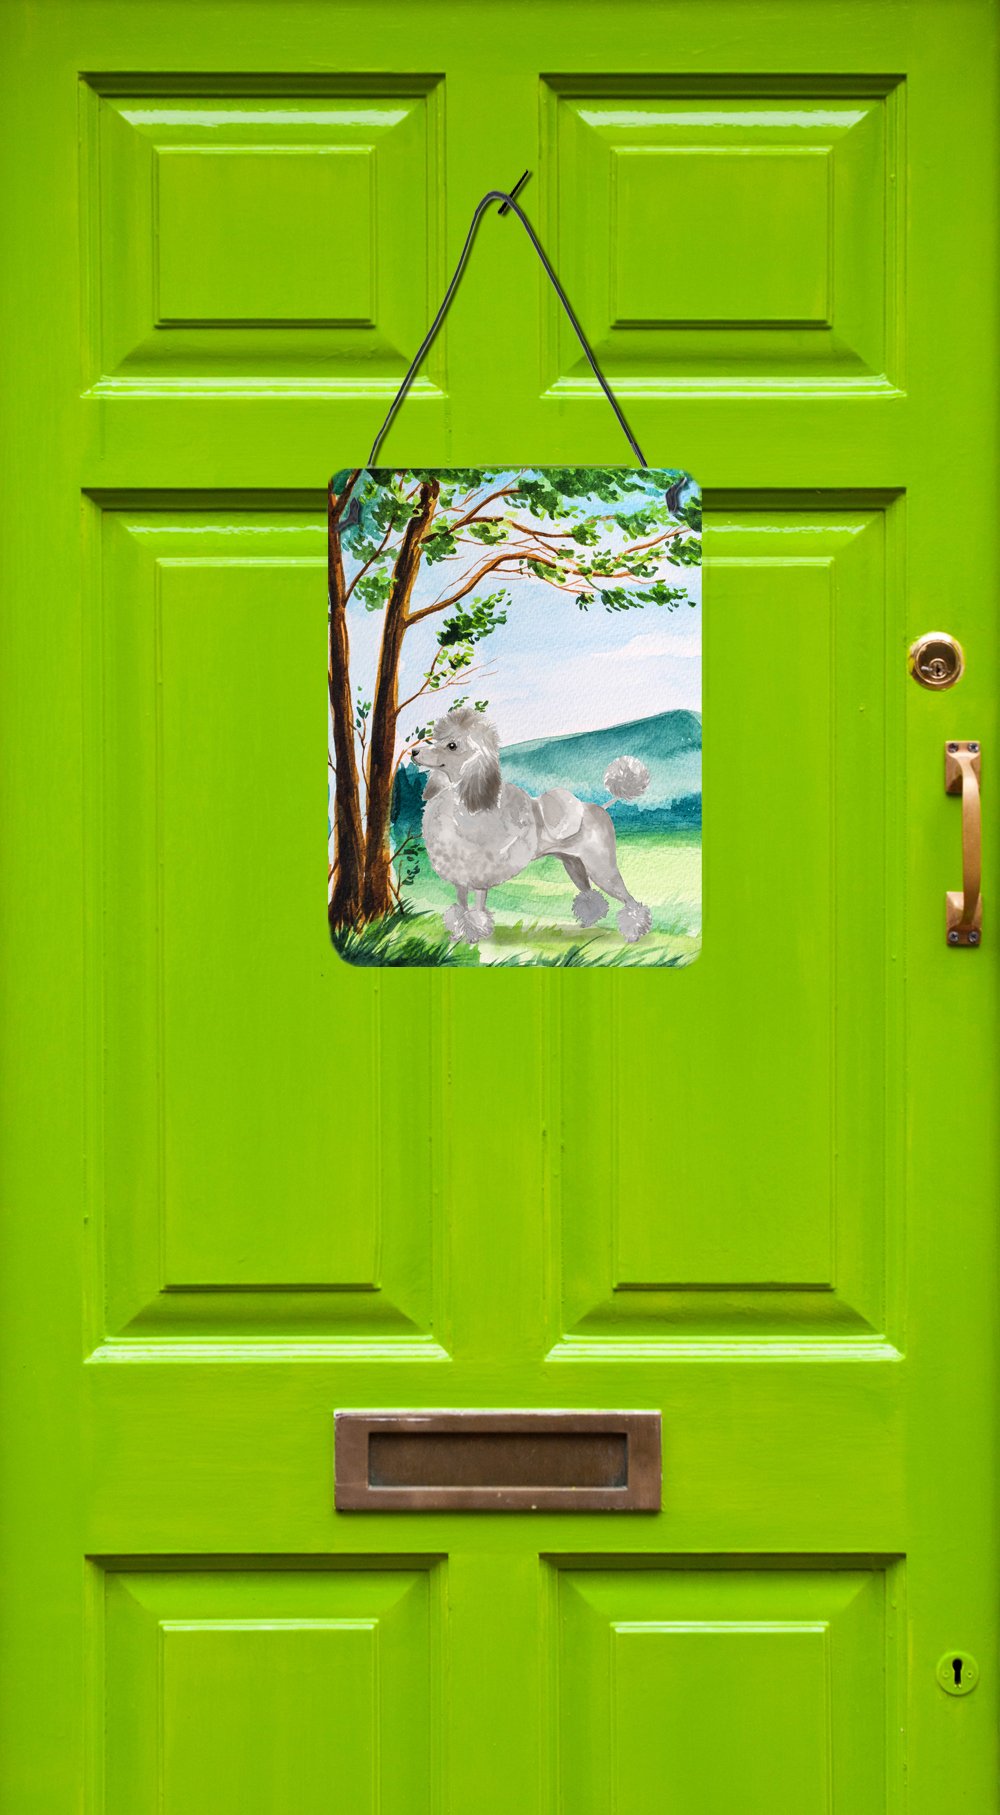 Under the Tree Silver Poodle Wall or Door Hanging Prints CK2010DS1216 by Caroline's Treasures